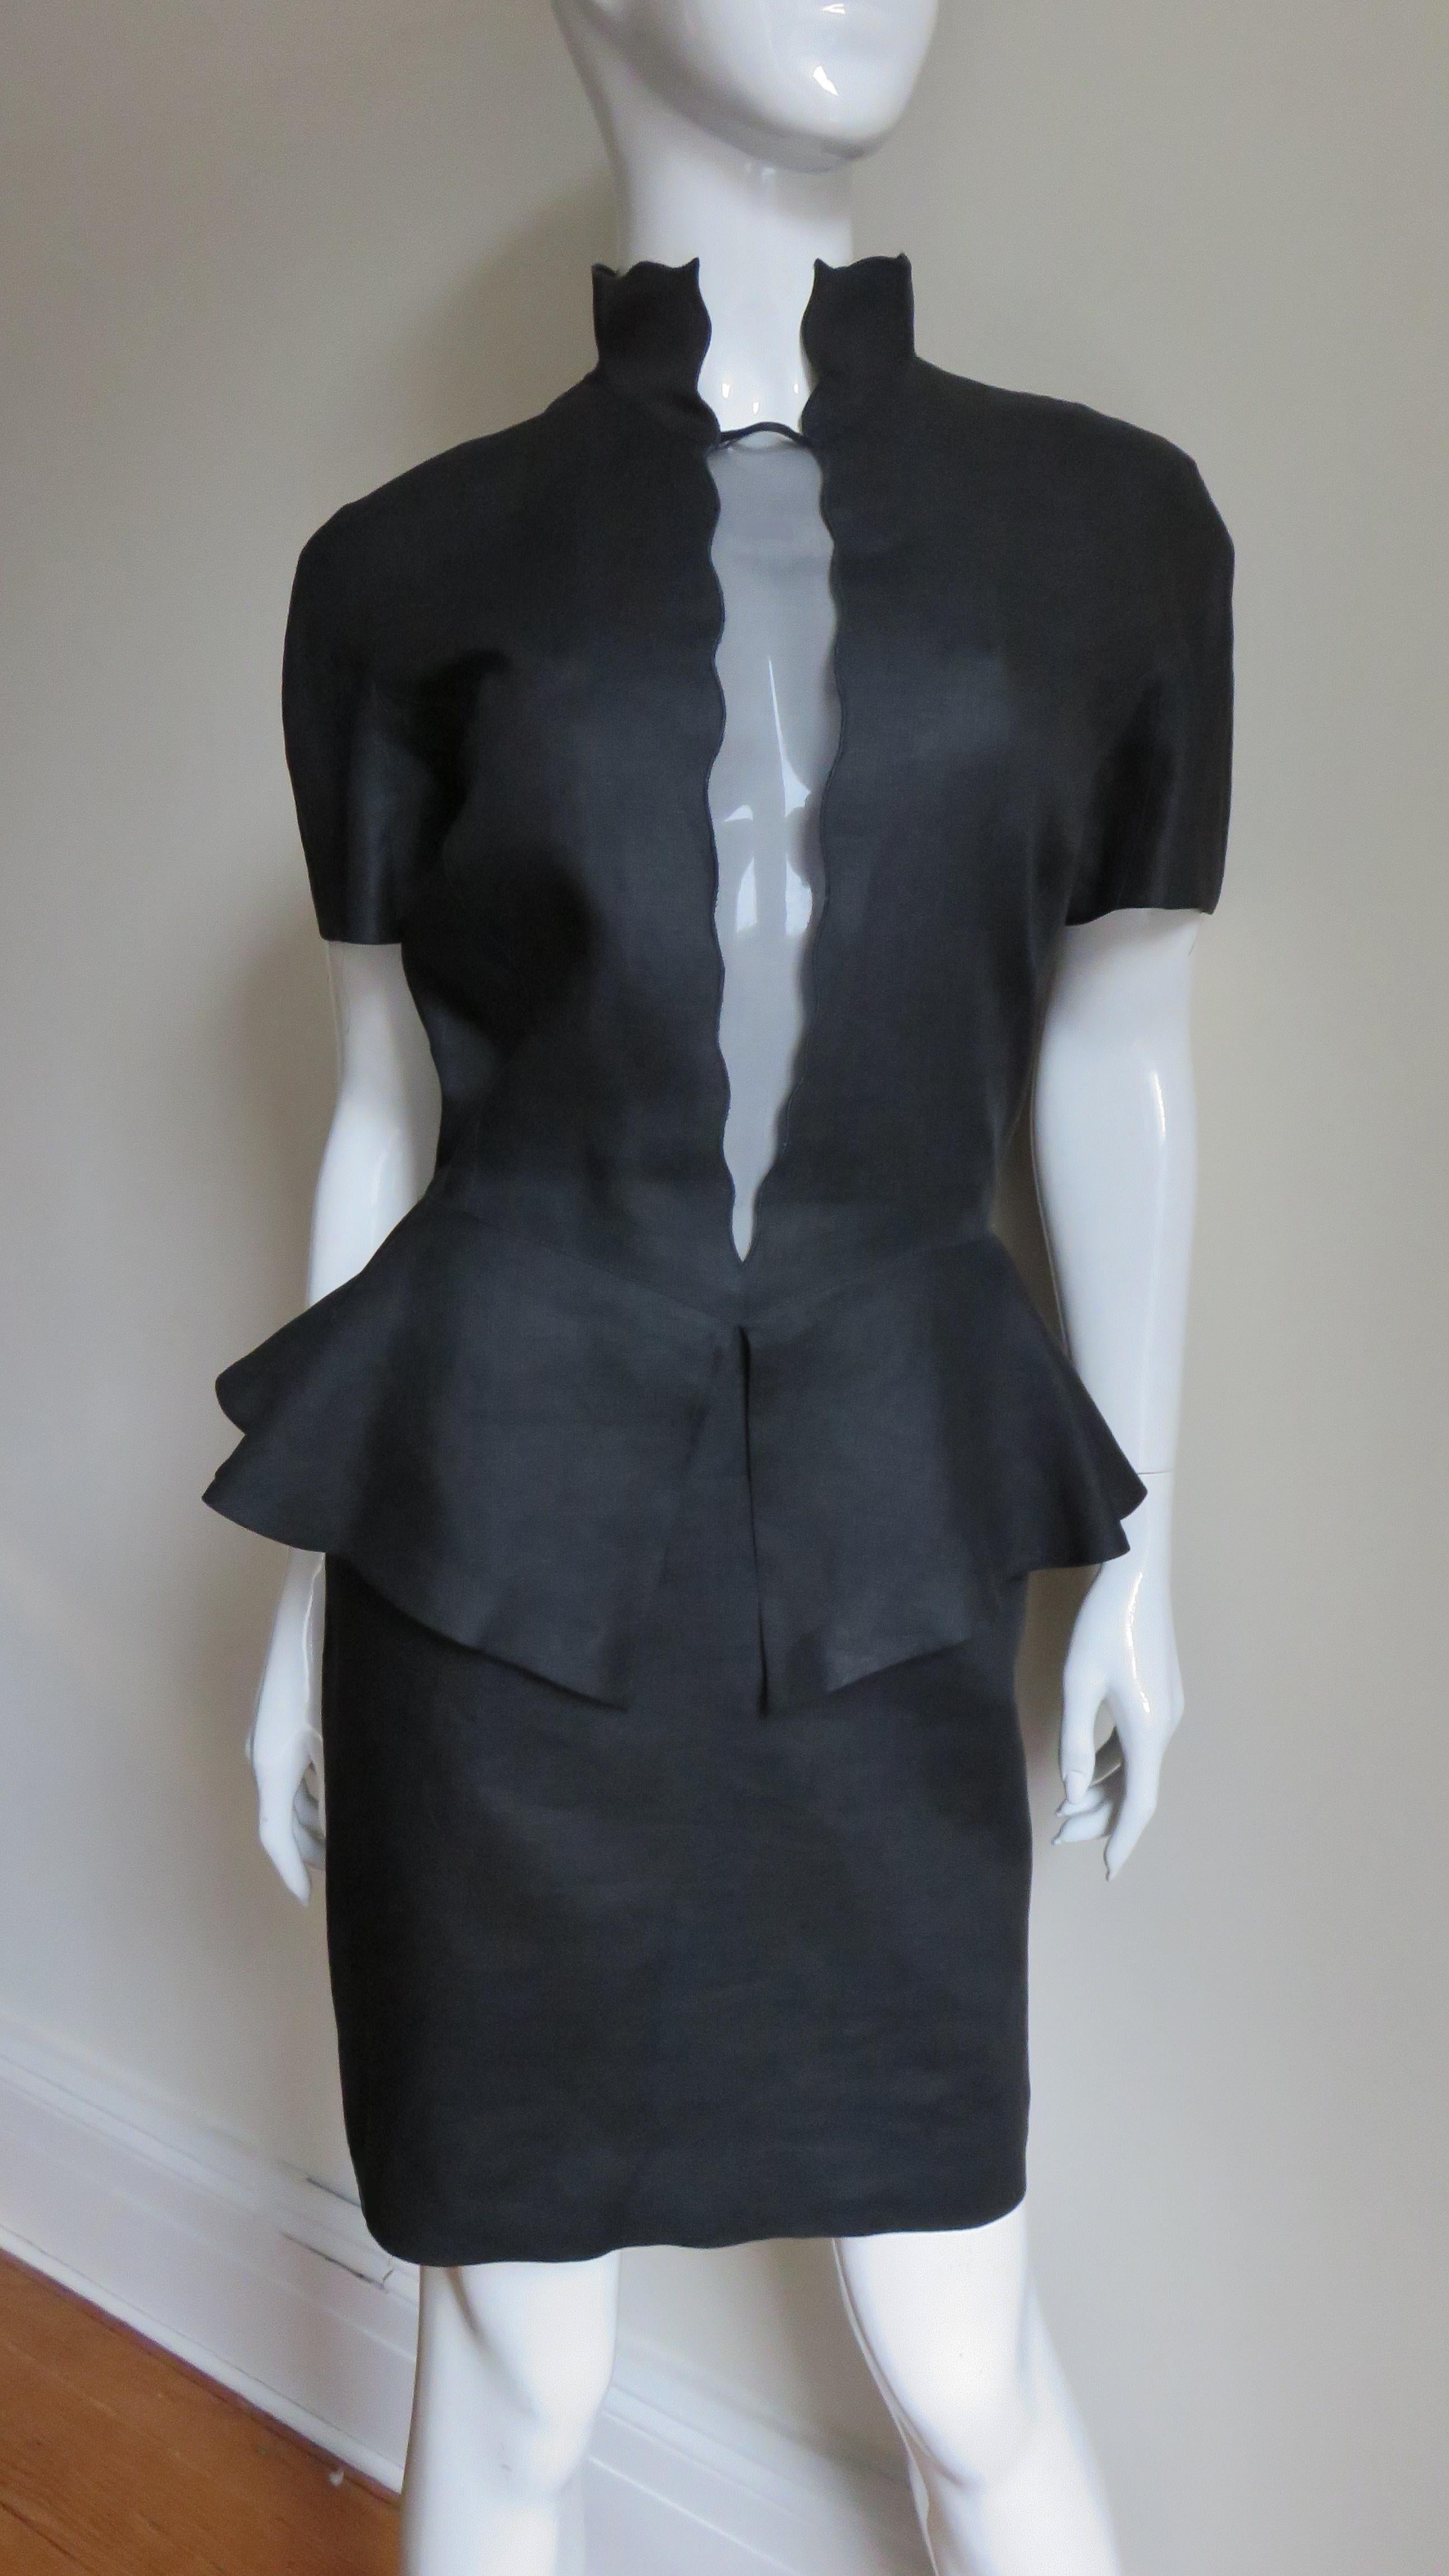 A great black fine linen dress from Louis Feraud.  It has a standup collar with a narrow plunging wedge of sheer black with subtle scallop edges from neck to waist. The short sleeves are cut in one piece with the bodice and have panels under the